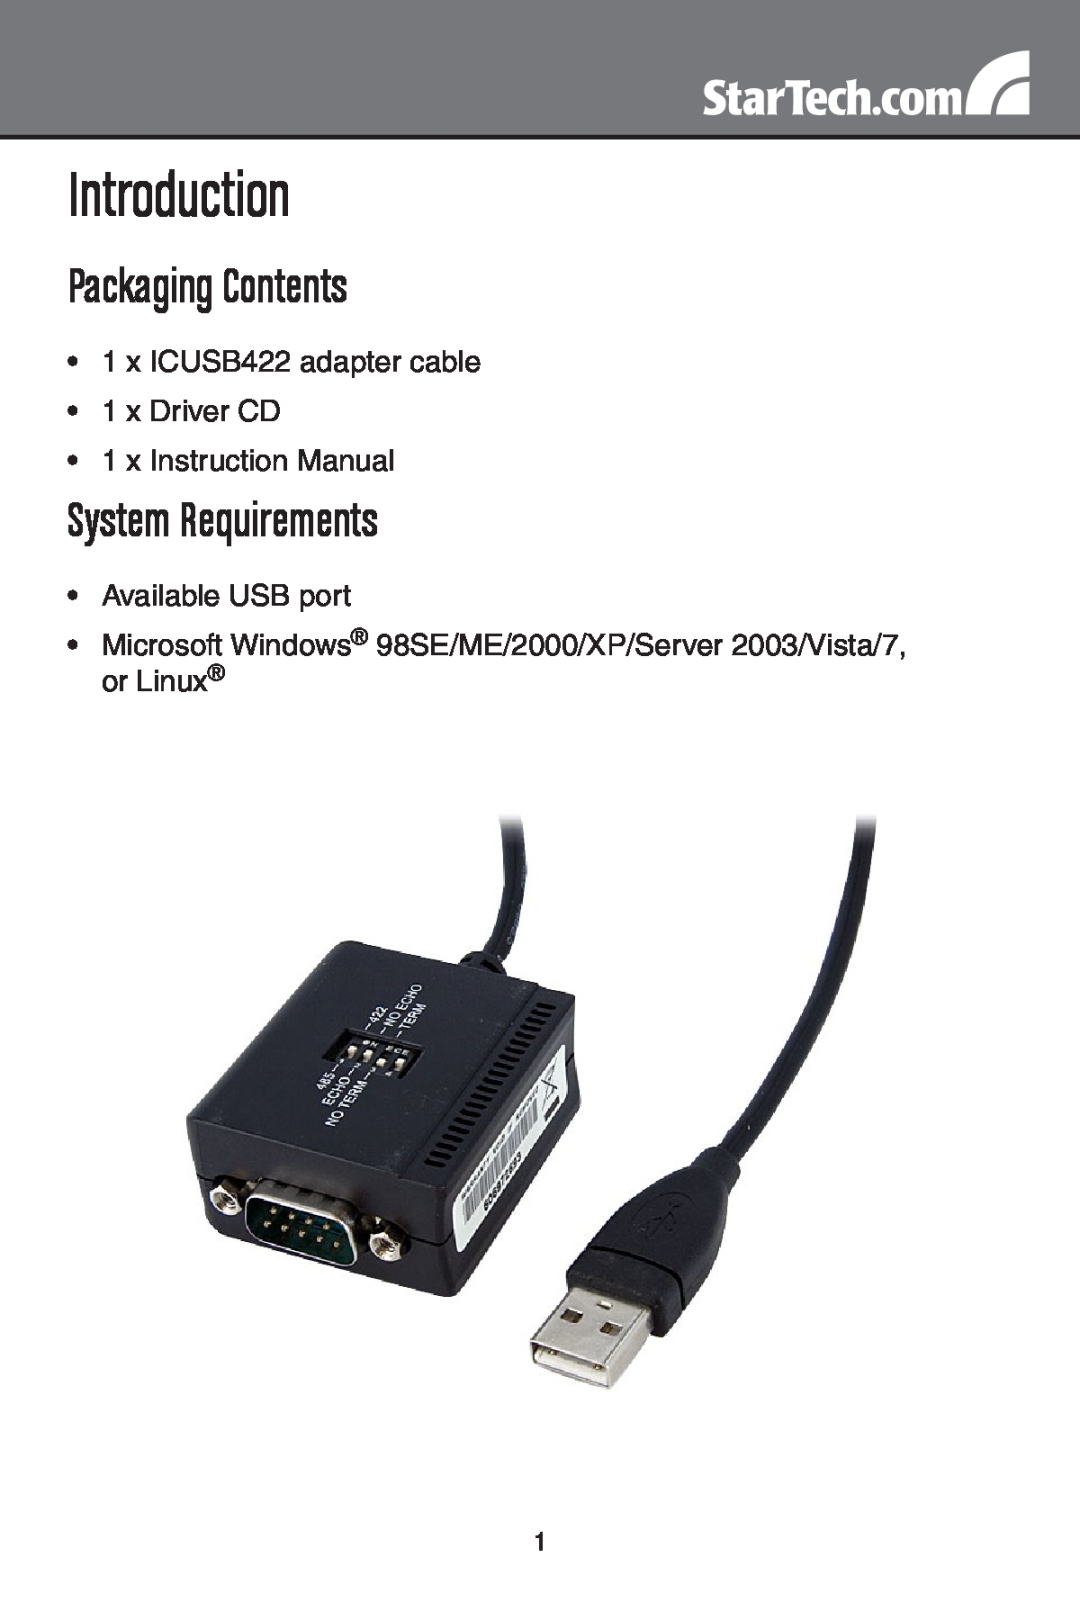 StarTech.com ICUSB422 instruction manual Introduction, Packaging Contents, System Requirements 